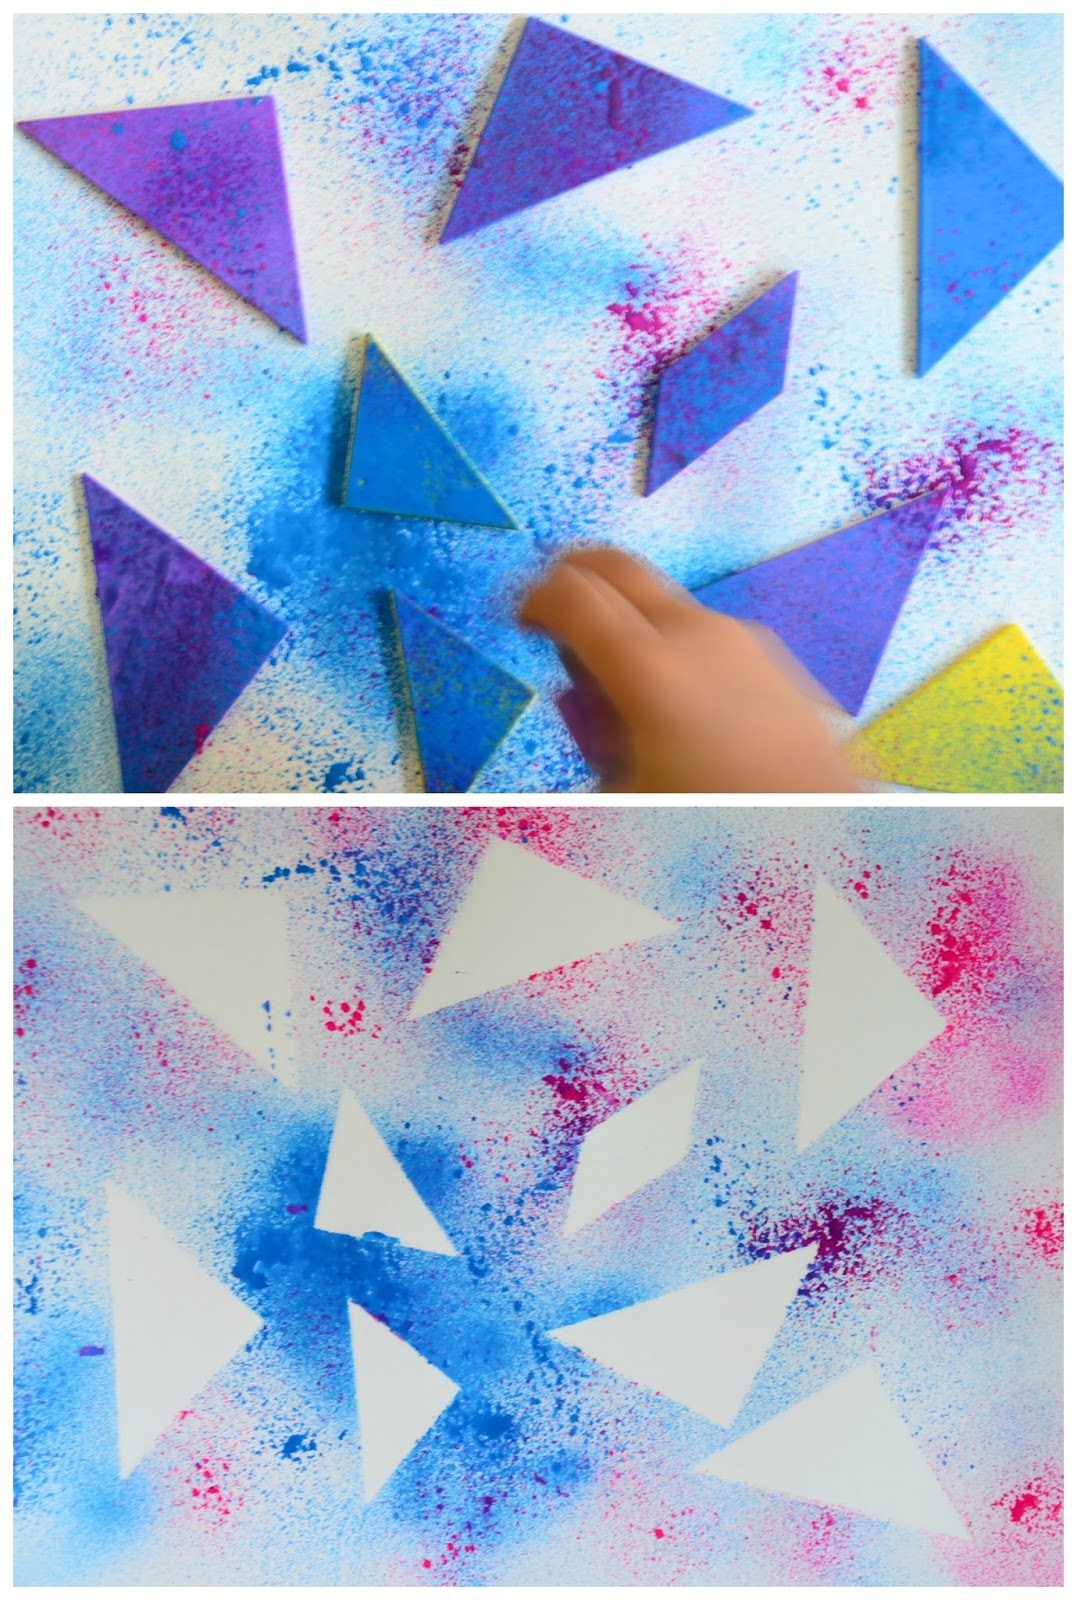 The Practical Mom: Paint with Tangram